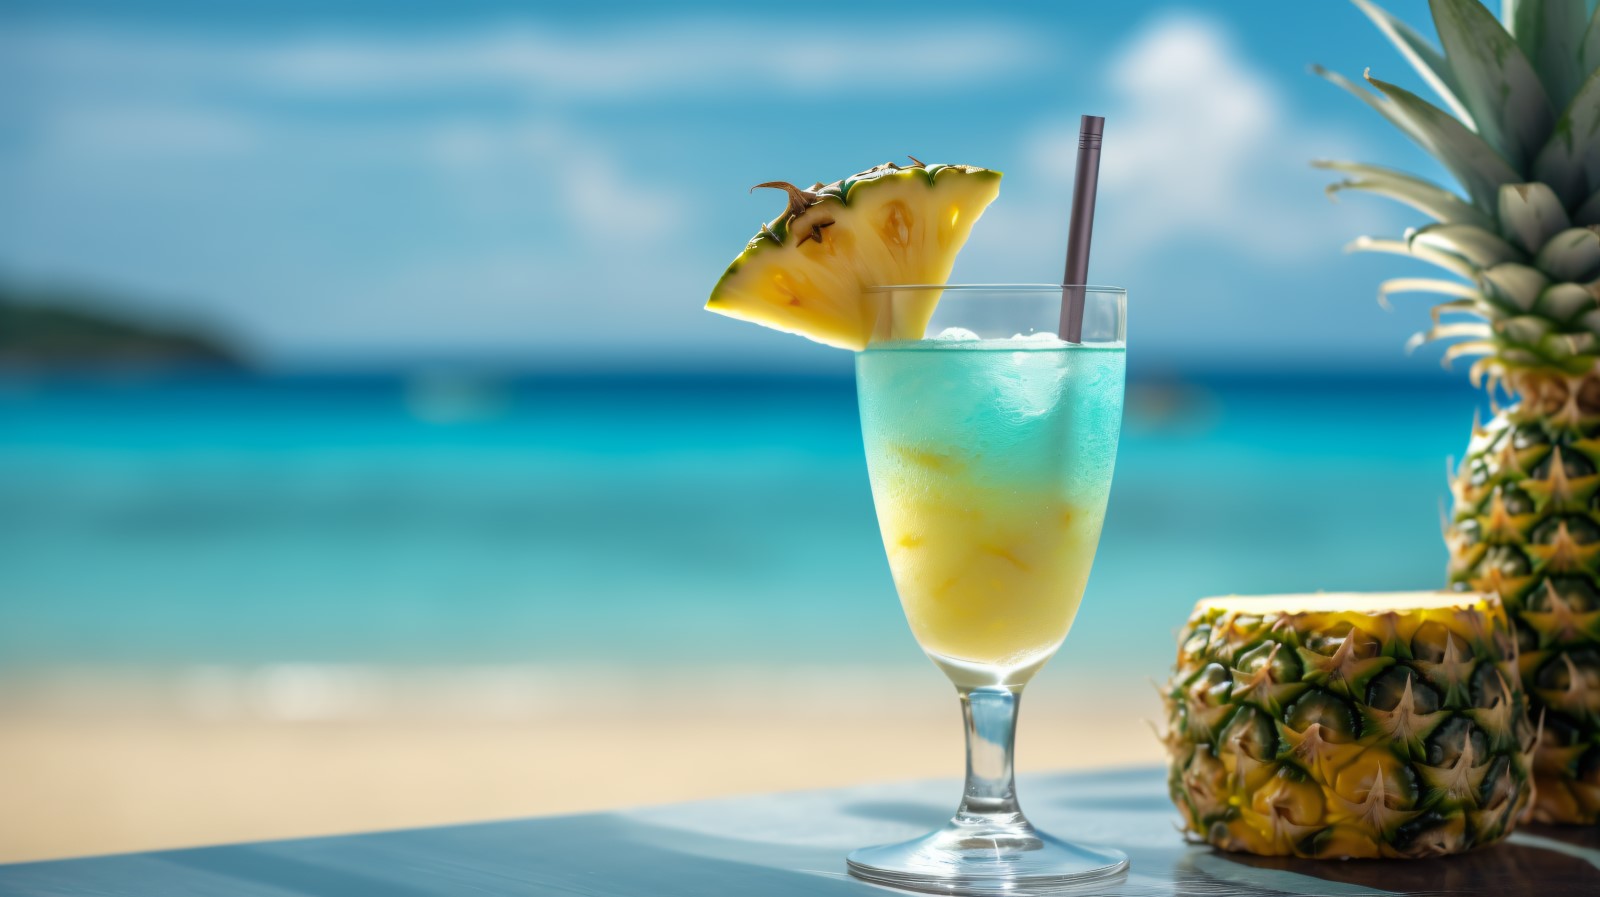 pineapple drink in cocktail glass and sand beach scene 125